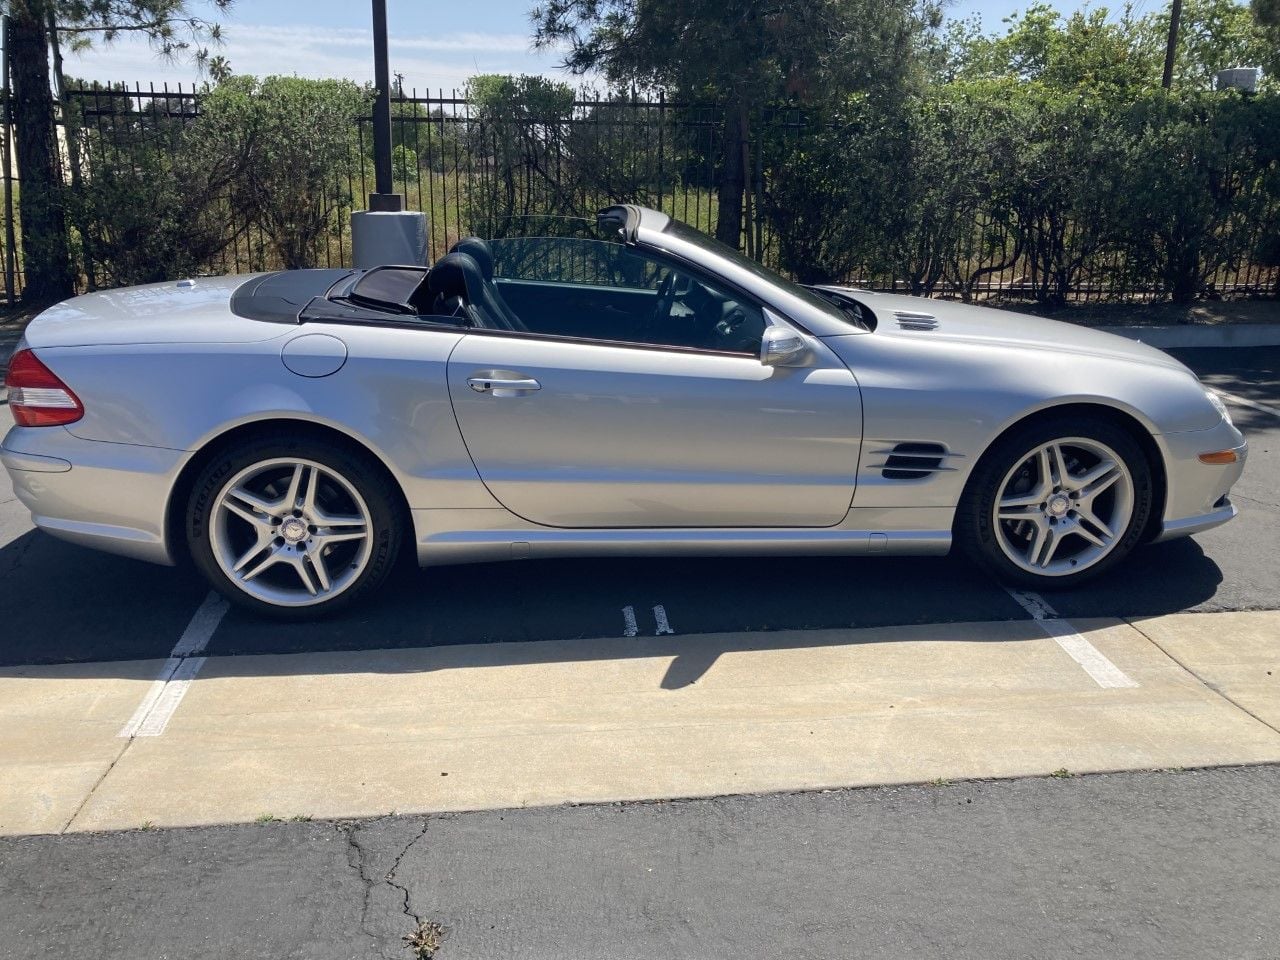 2008 Mercedes-Benz SL550 - My Toy - Used - VIN WDBSK71F38F138296 - 75,200 Miles - 8 cyl - 2WD - Automatic - Convertible - Silver - San Bernardino, CA 92411, United States